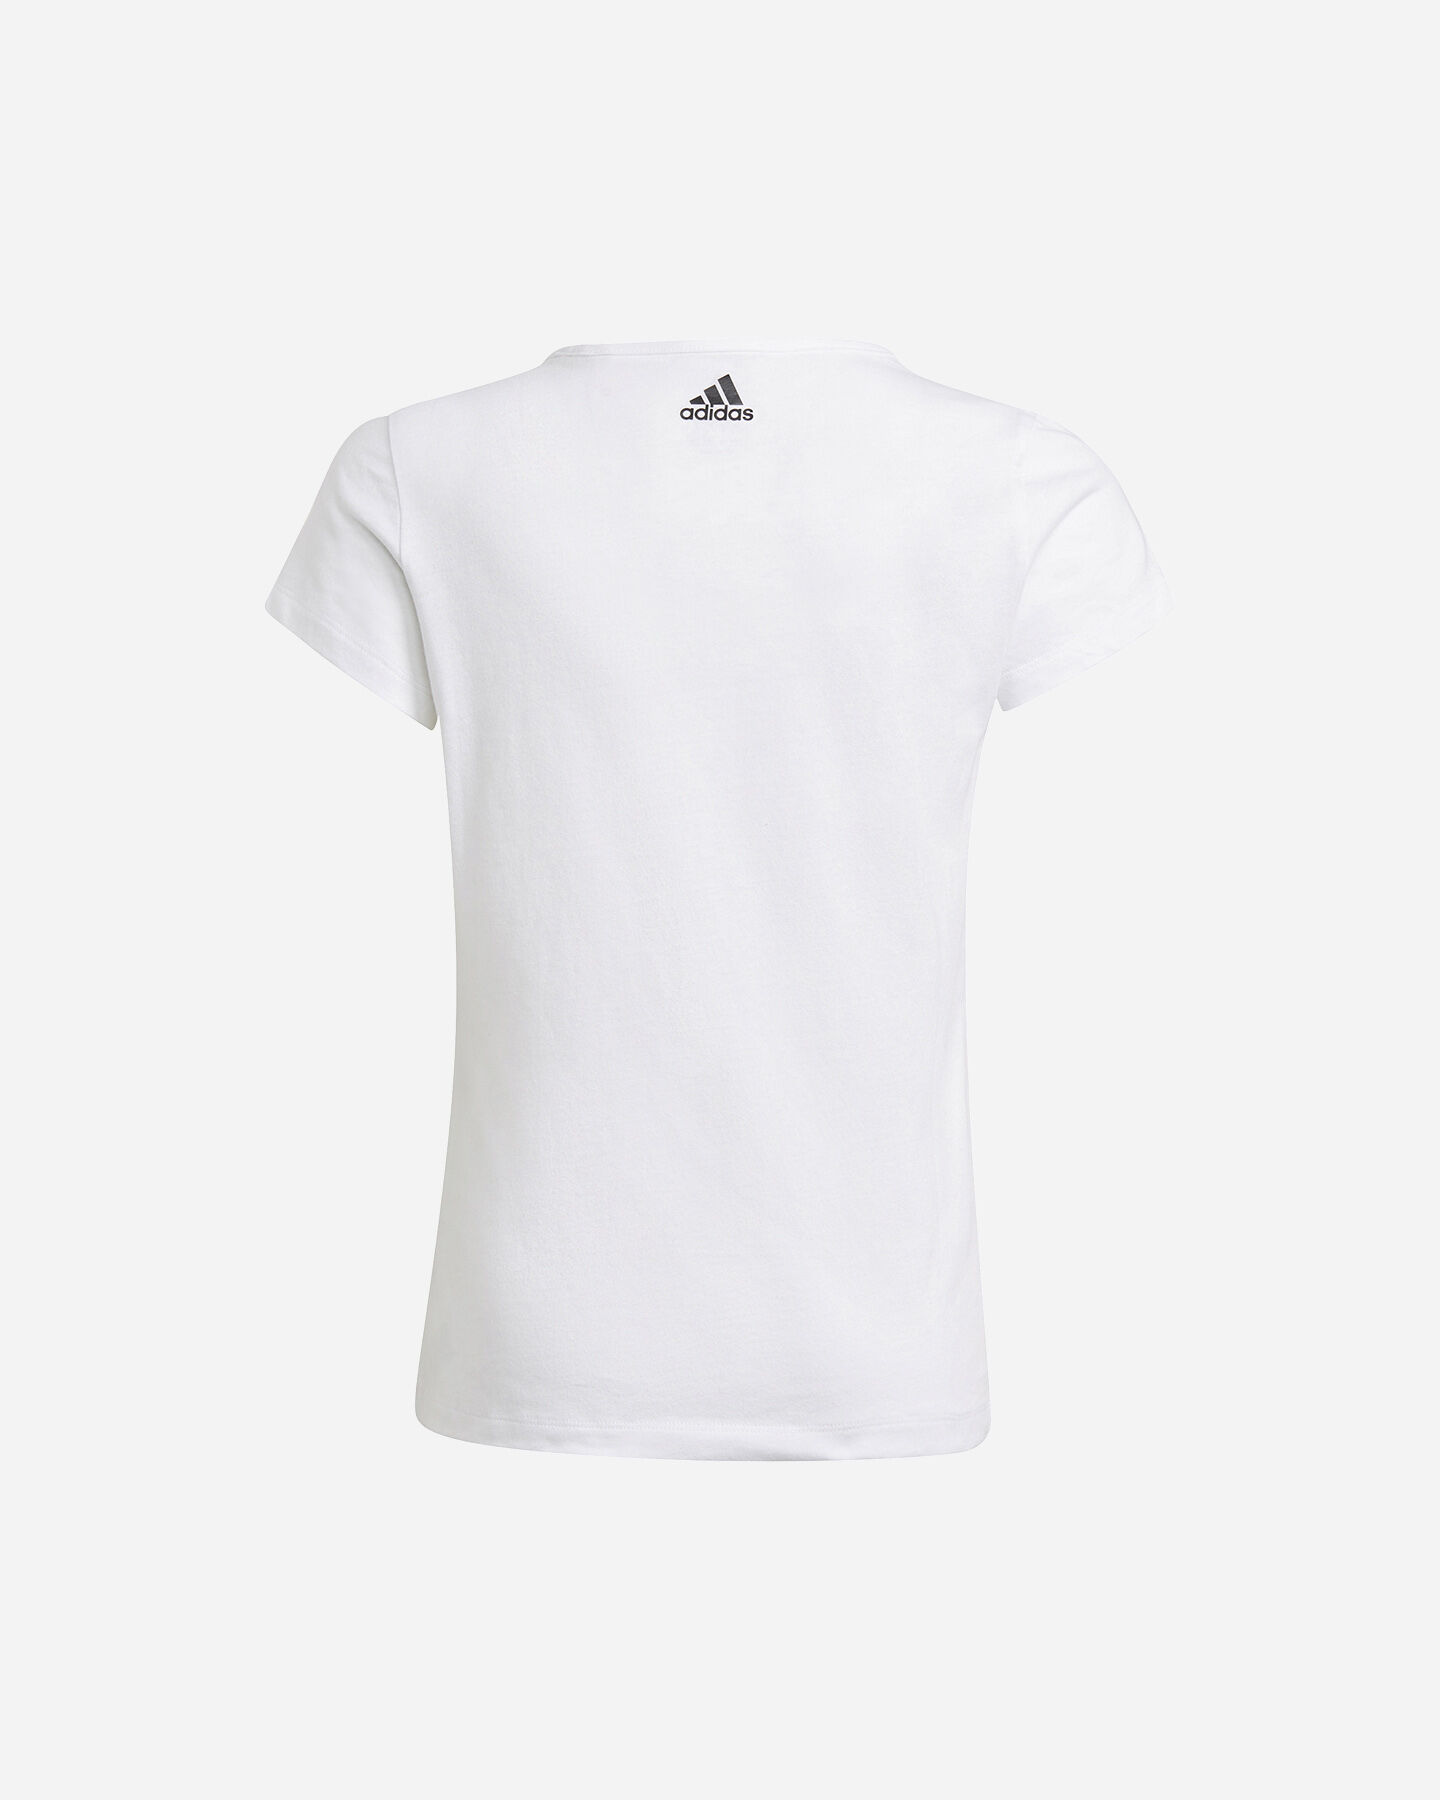  T-Shirt ADIDAS GRAPHIC JR S5276348|UNI|7-8A scatto 1